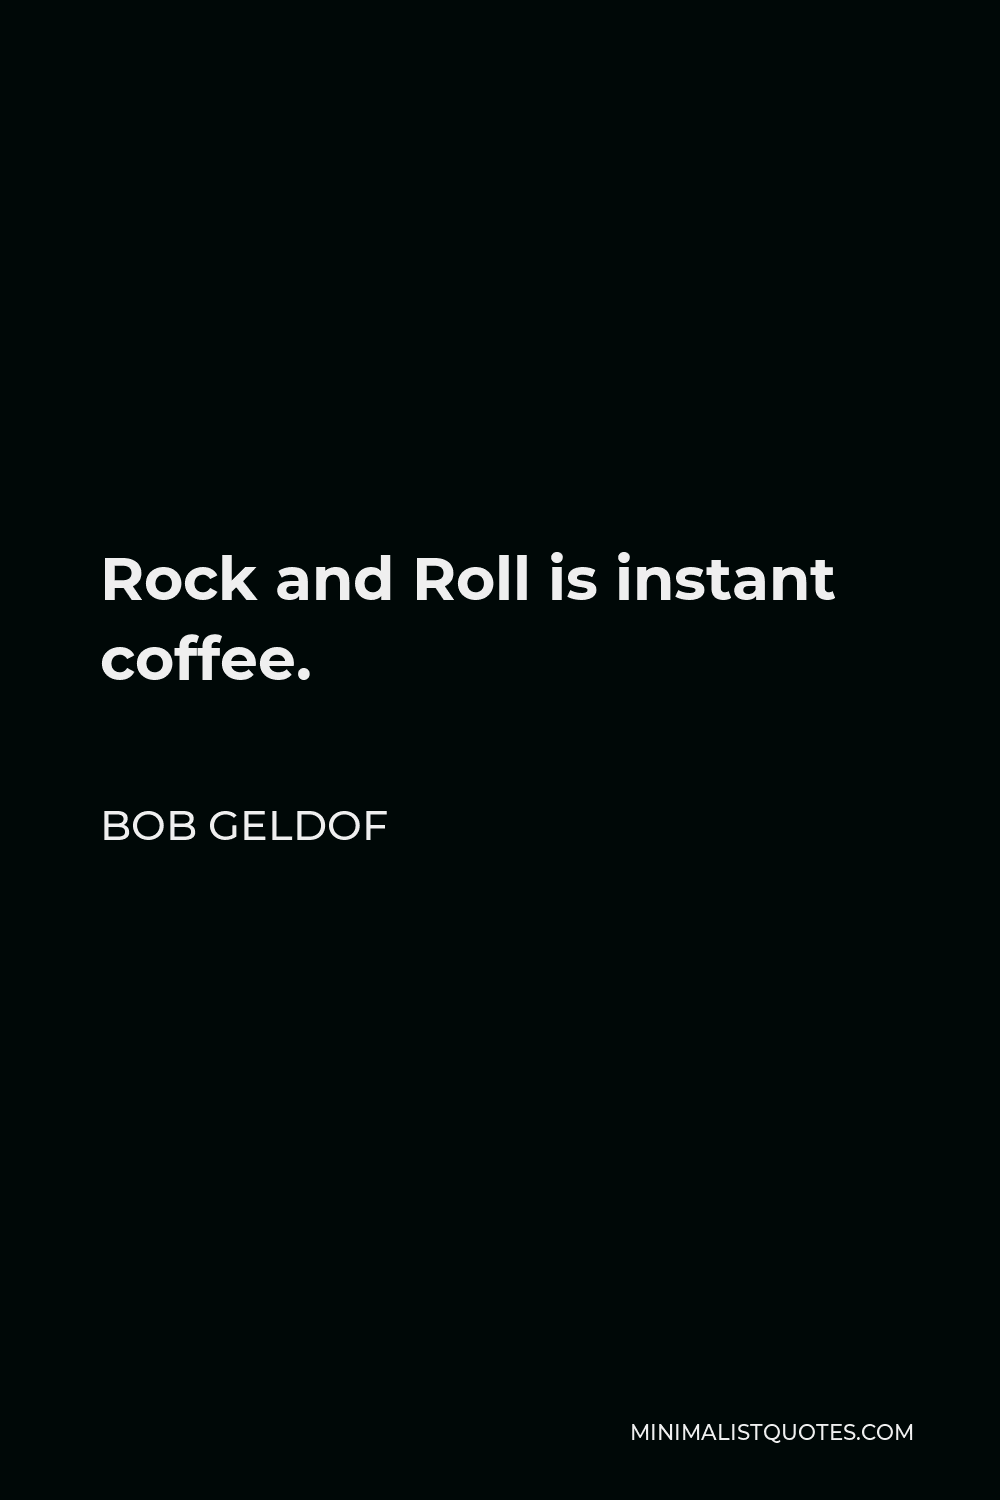 Bob Geldof Quote - Rock and Roll is instant coffee.